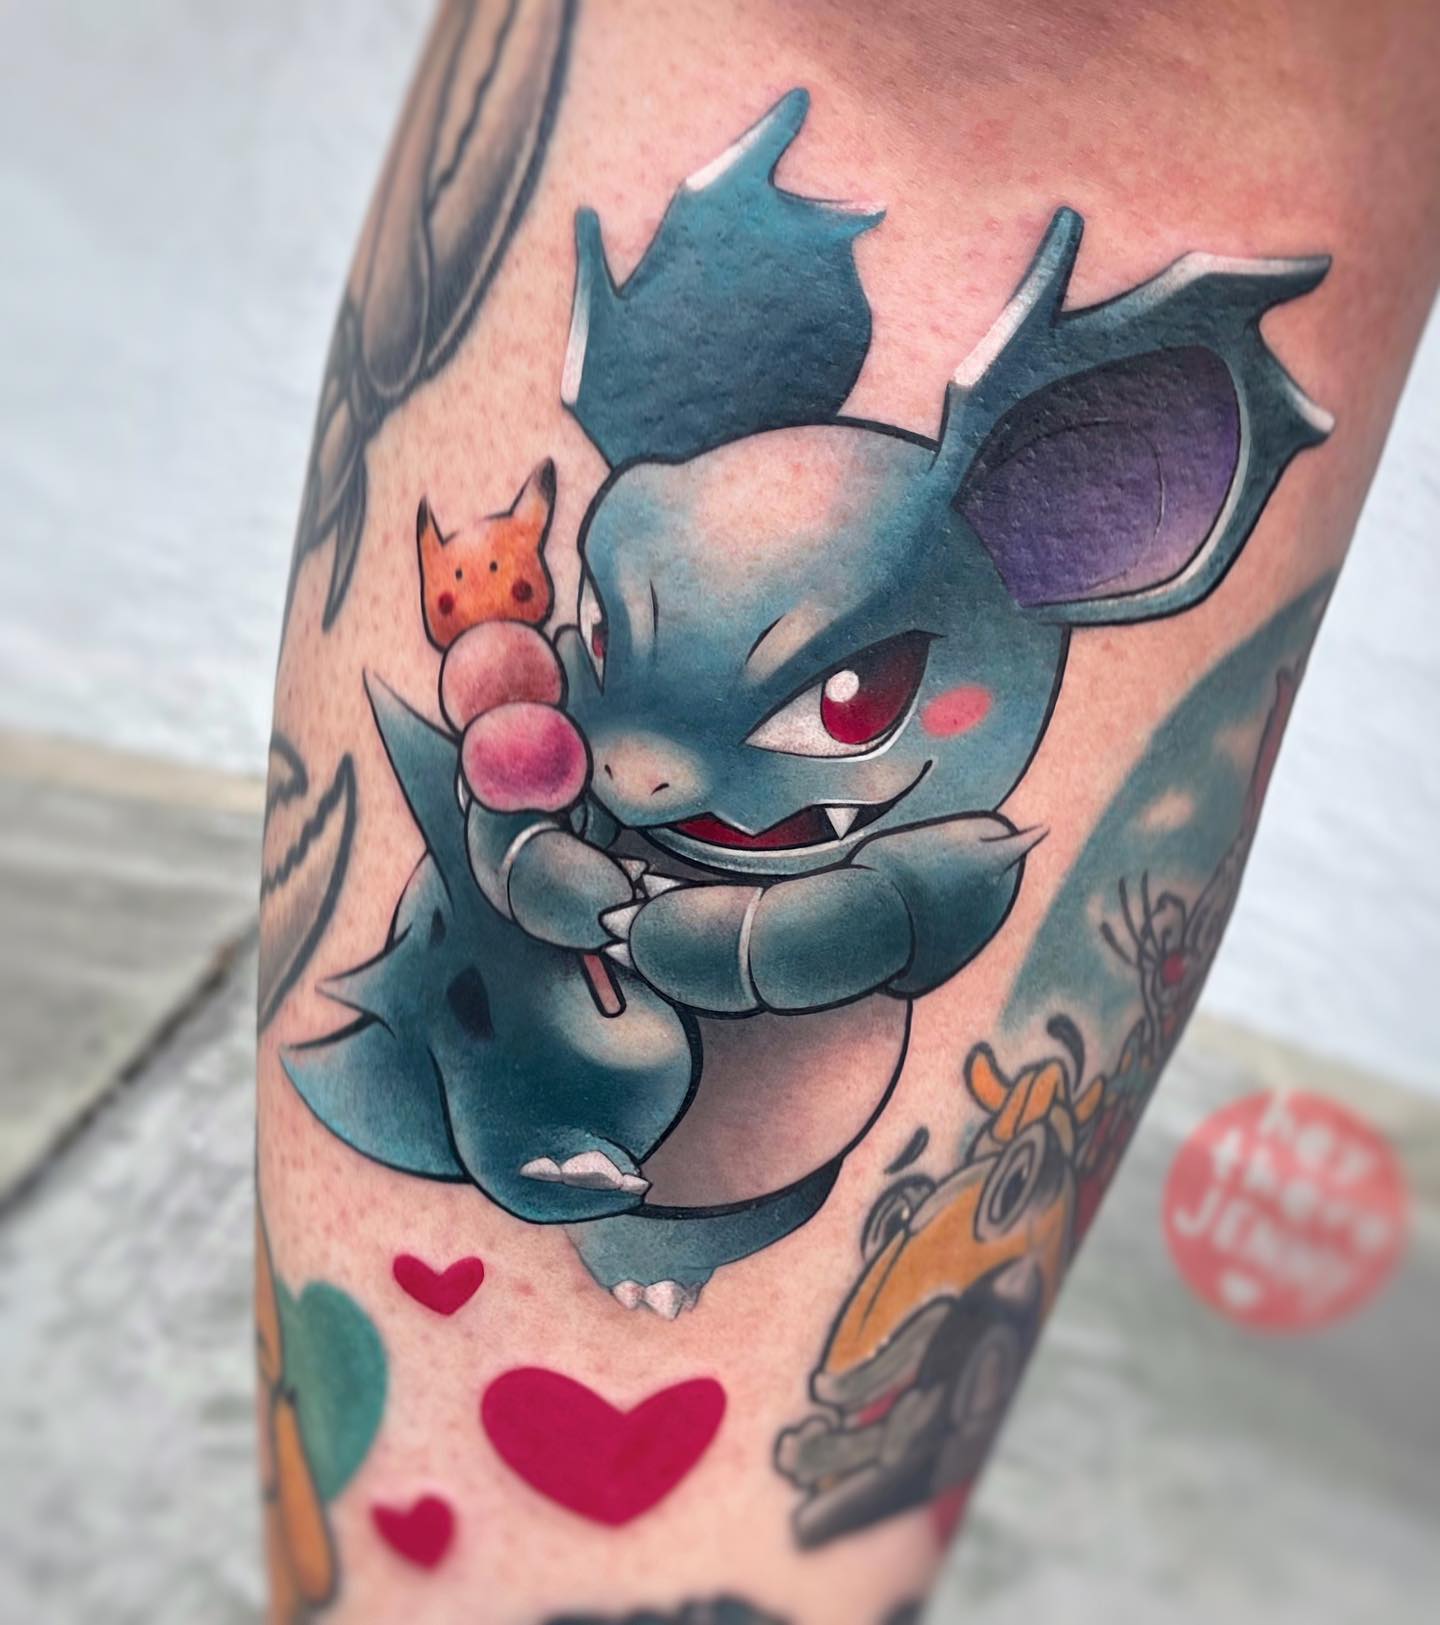 Nidorina is a Pokemon that first appeared in the second generation of video games, back in 1996. It's one of the few Pokemon that can evolve into multiple other Pokemon. Give it a shot for your next tattoo.